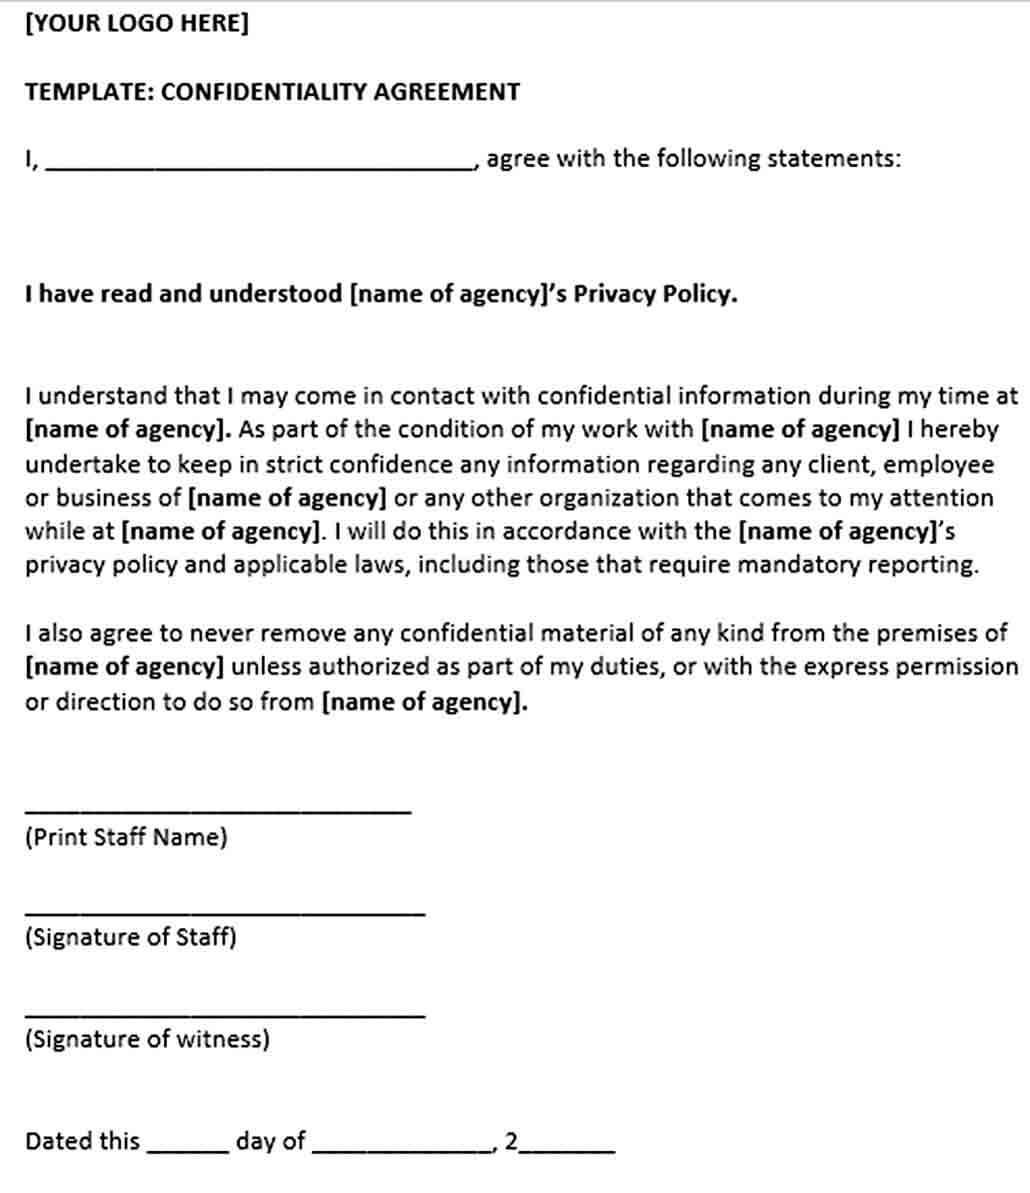 Sample Celebrity Confidentiality Agreement Template